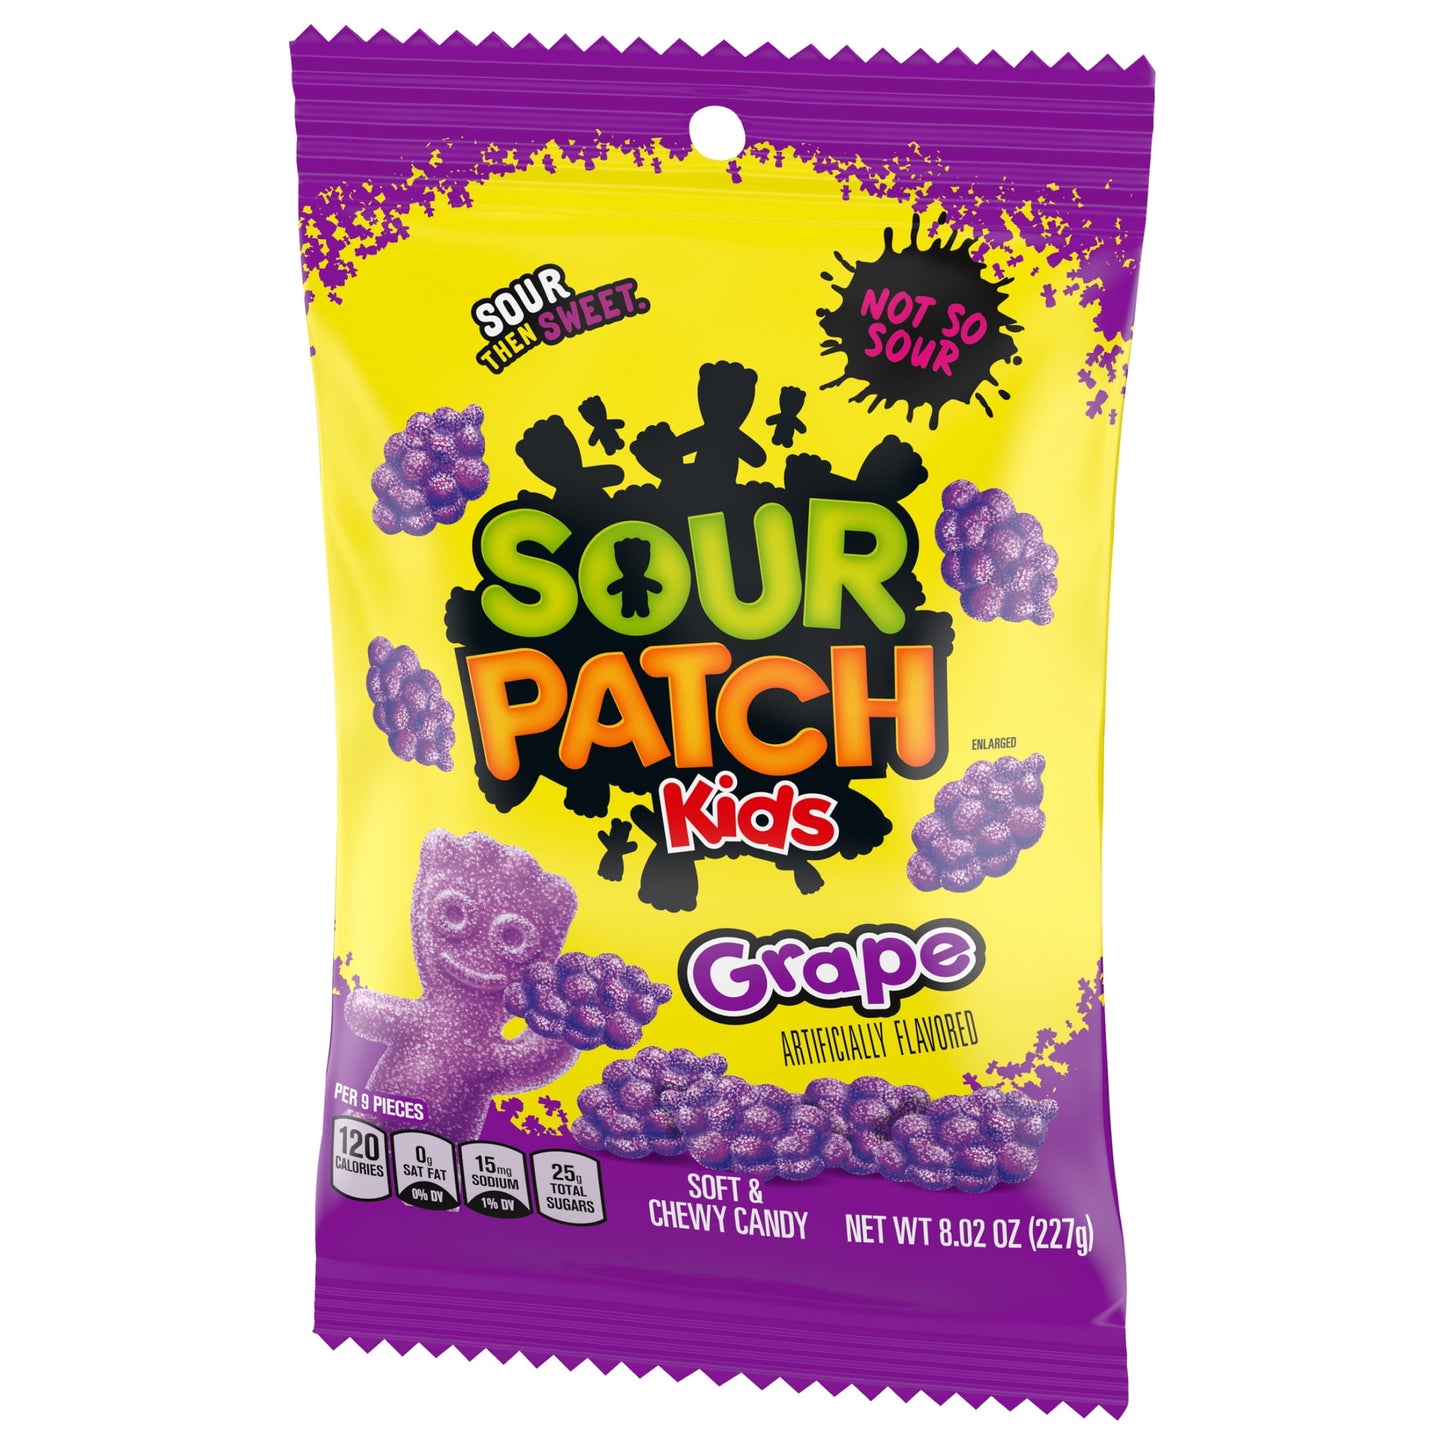 Grape Soft & Chewy Candy, 8.02 Oz